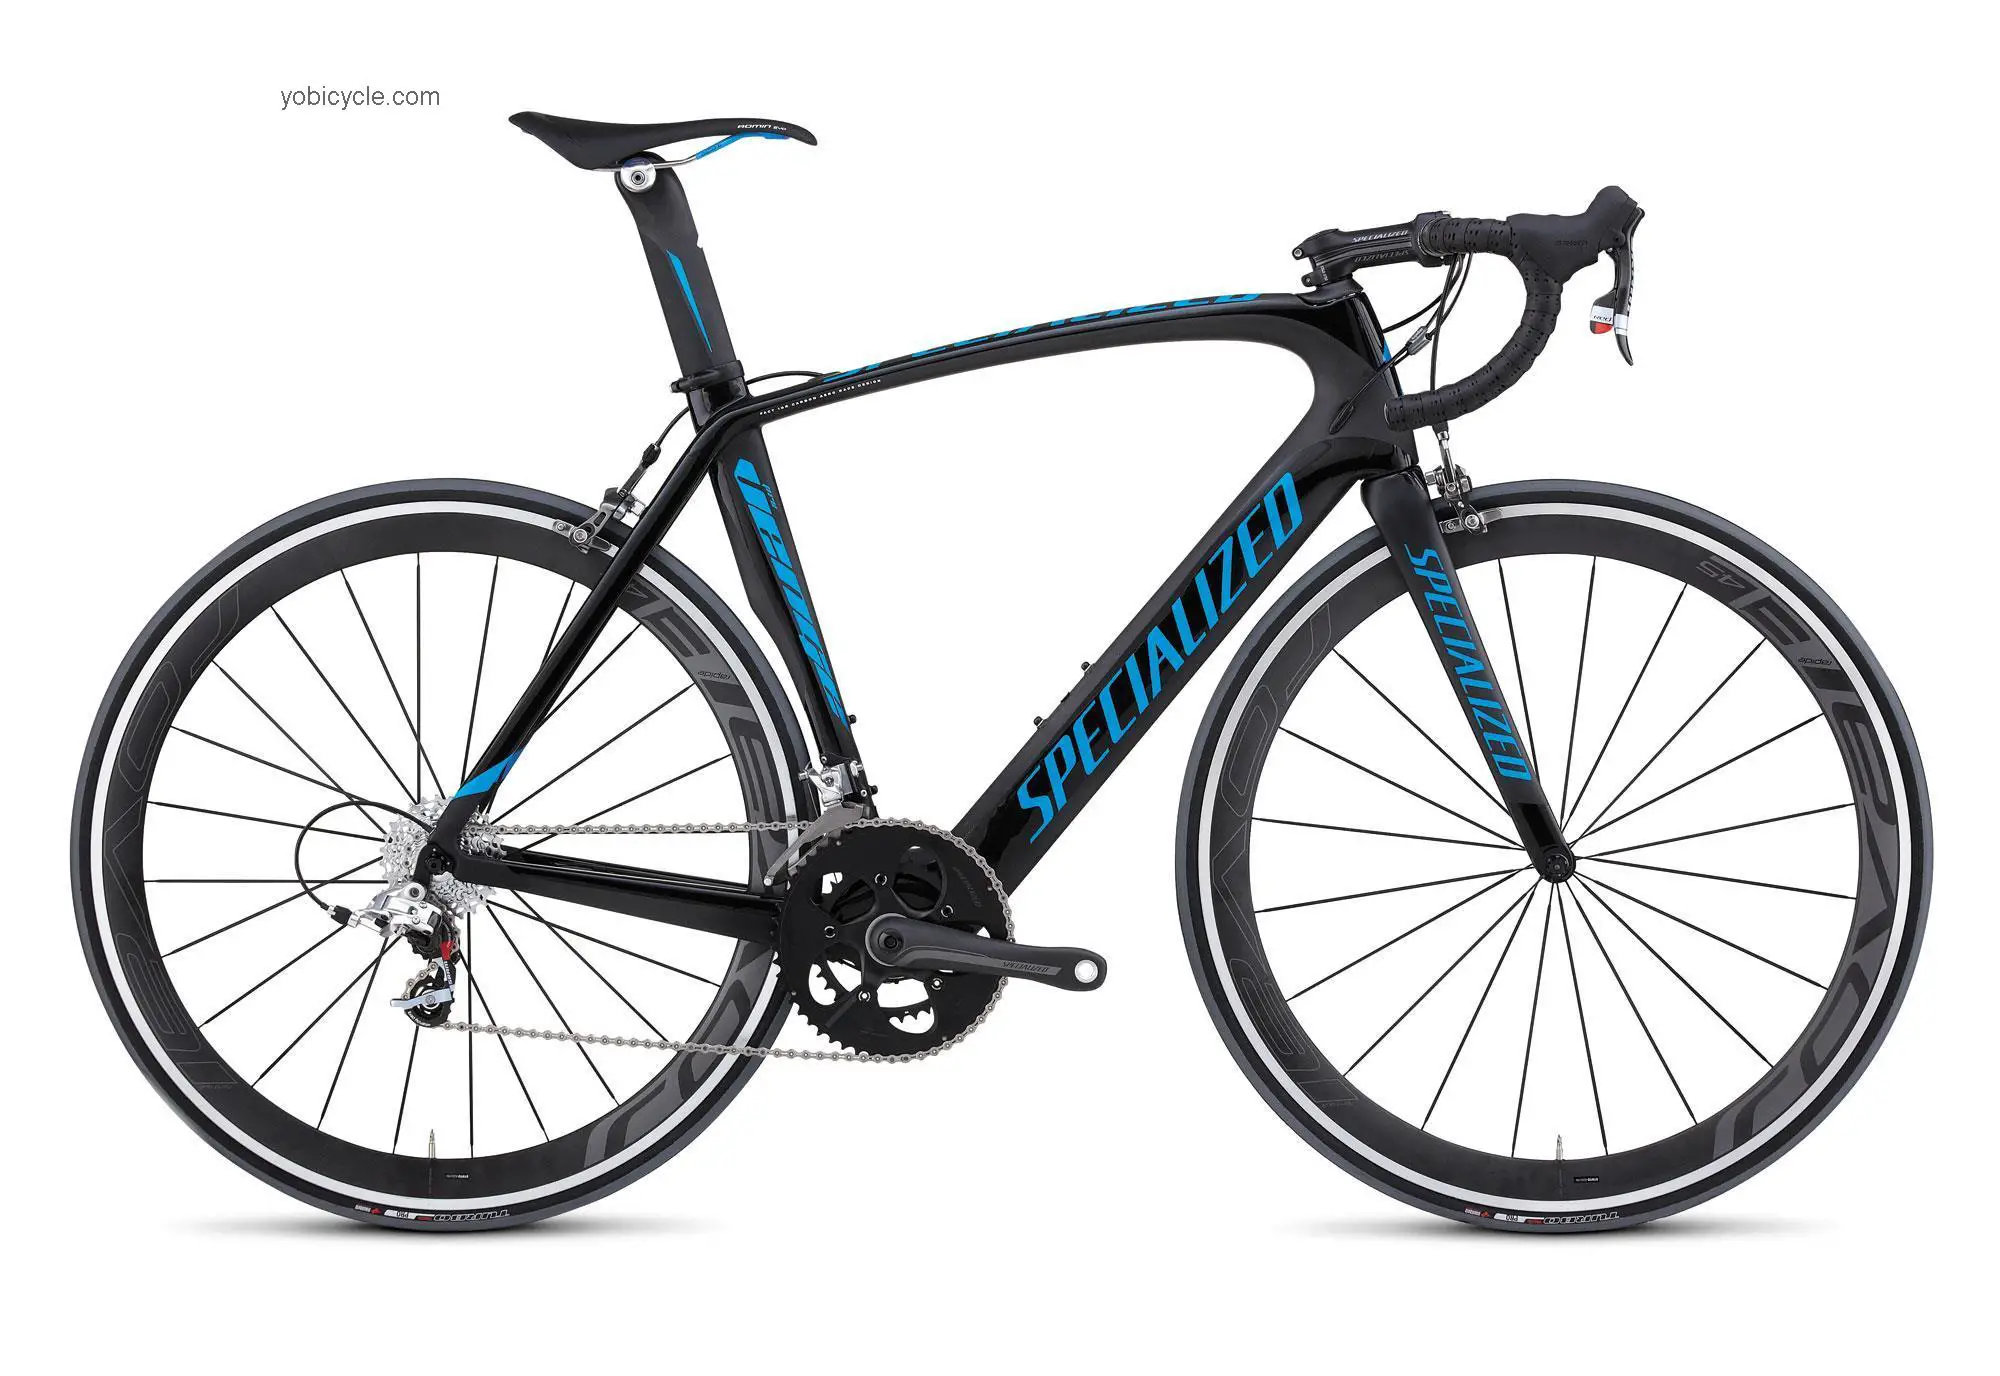 Specialized Venge Pro M2 SRAM RED 2012 comparison online with competitors